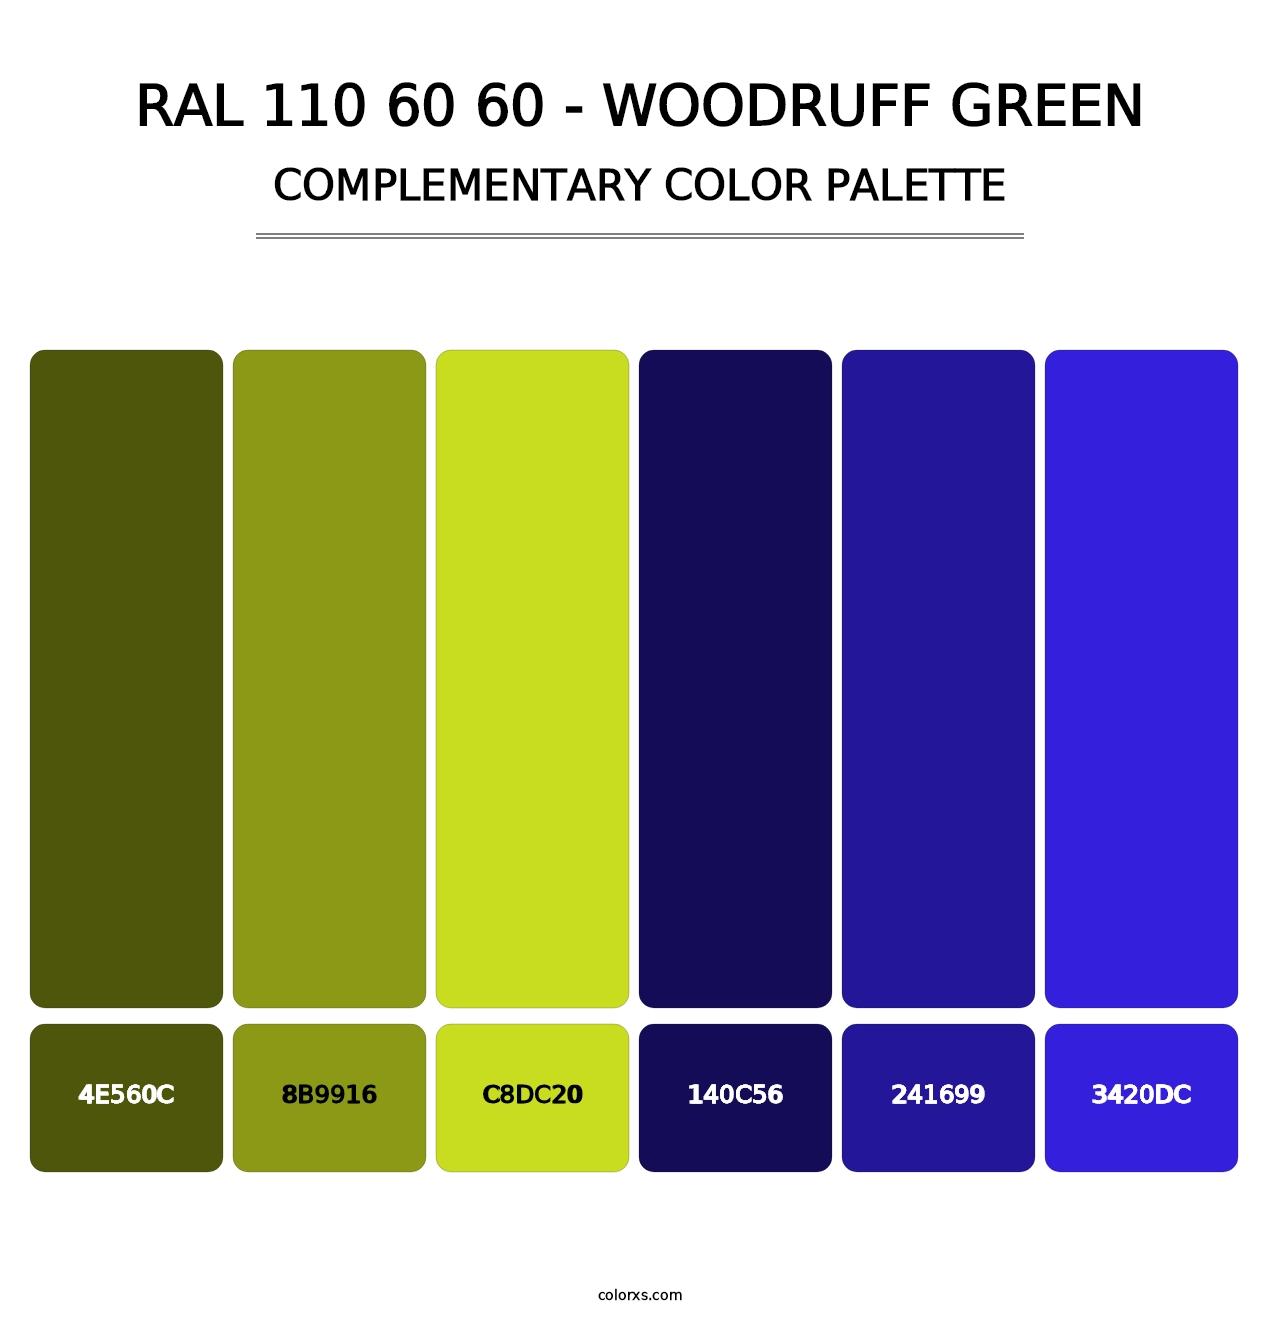 RAL 110 60 60 - Woodruff Green - Complementary Color Palette